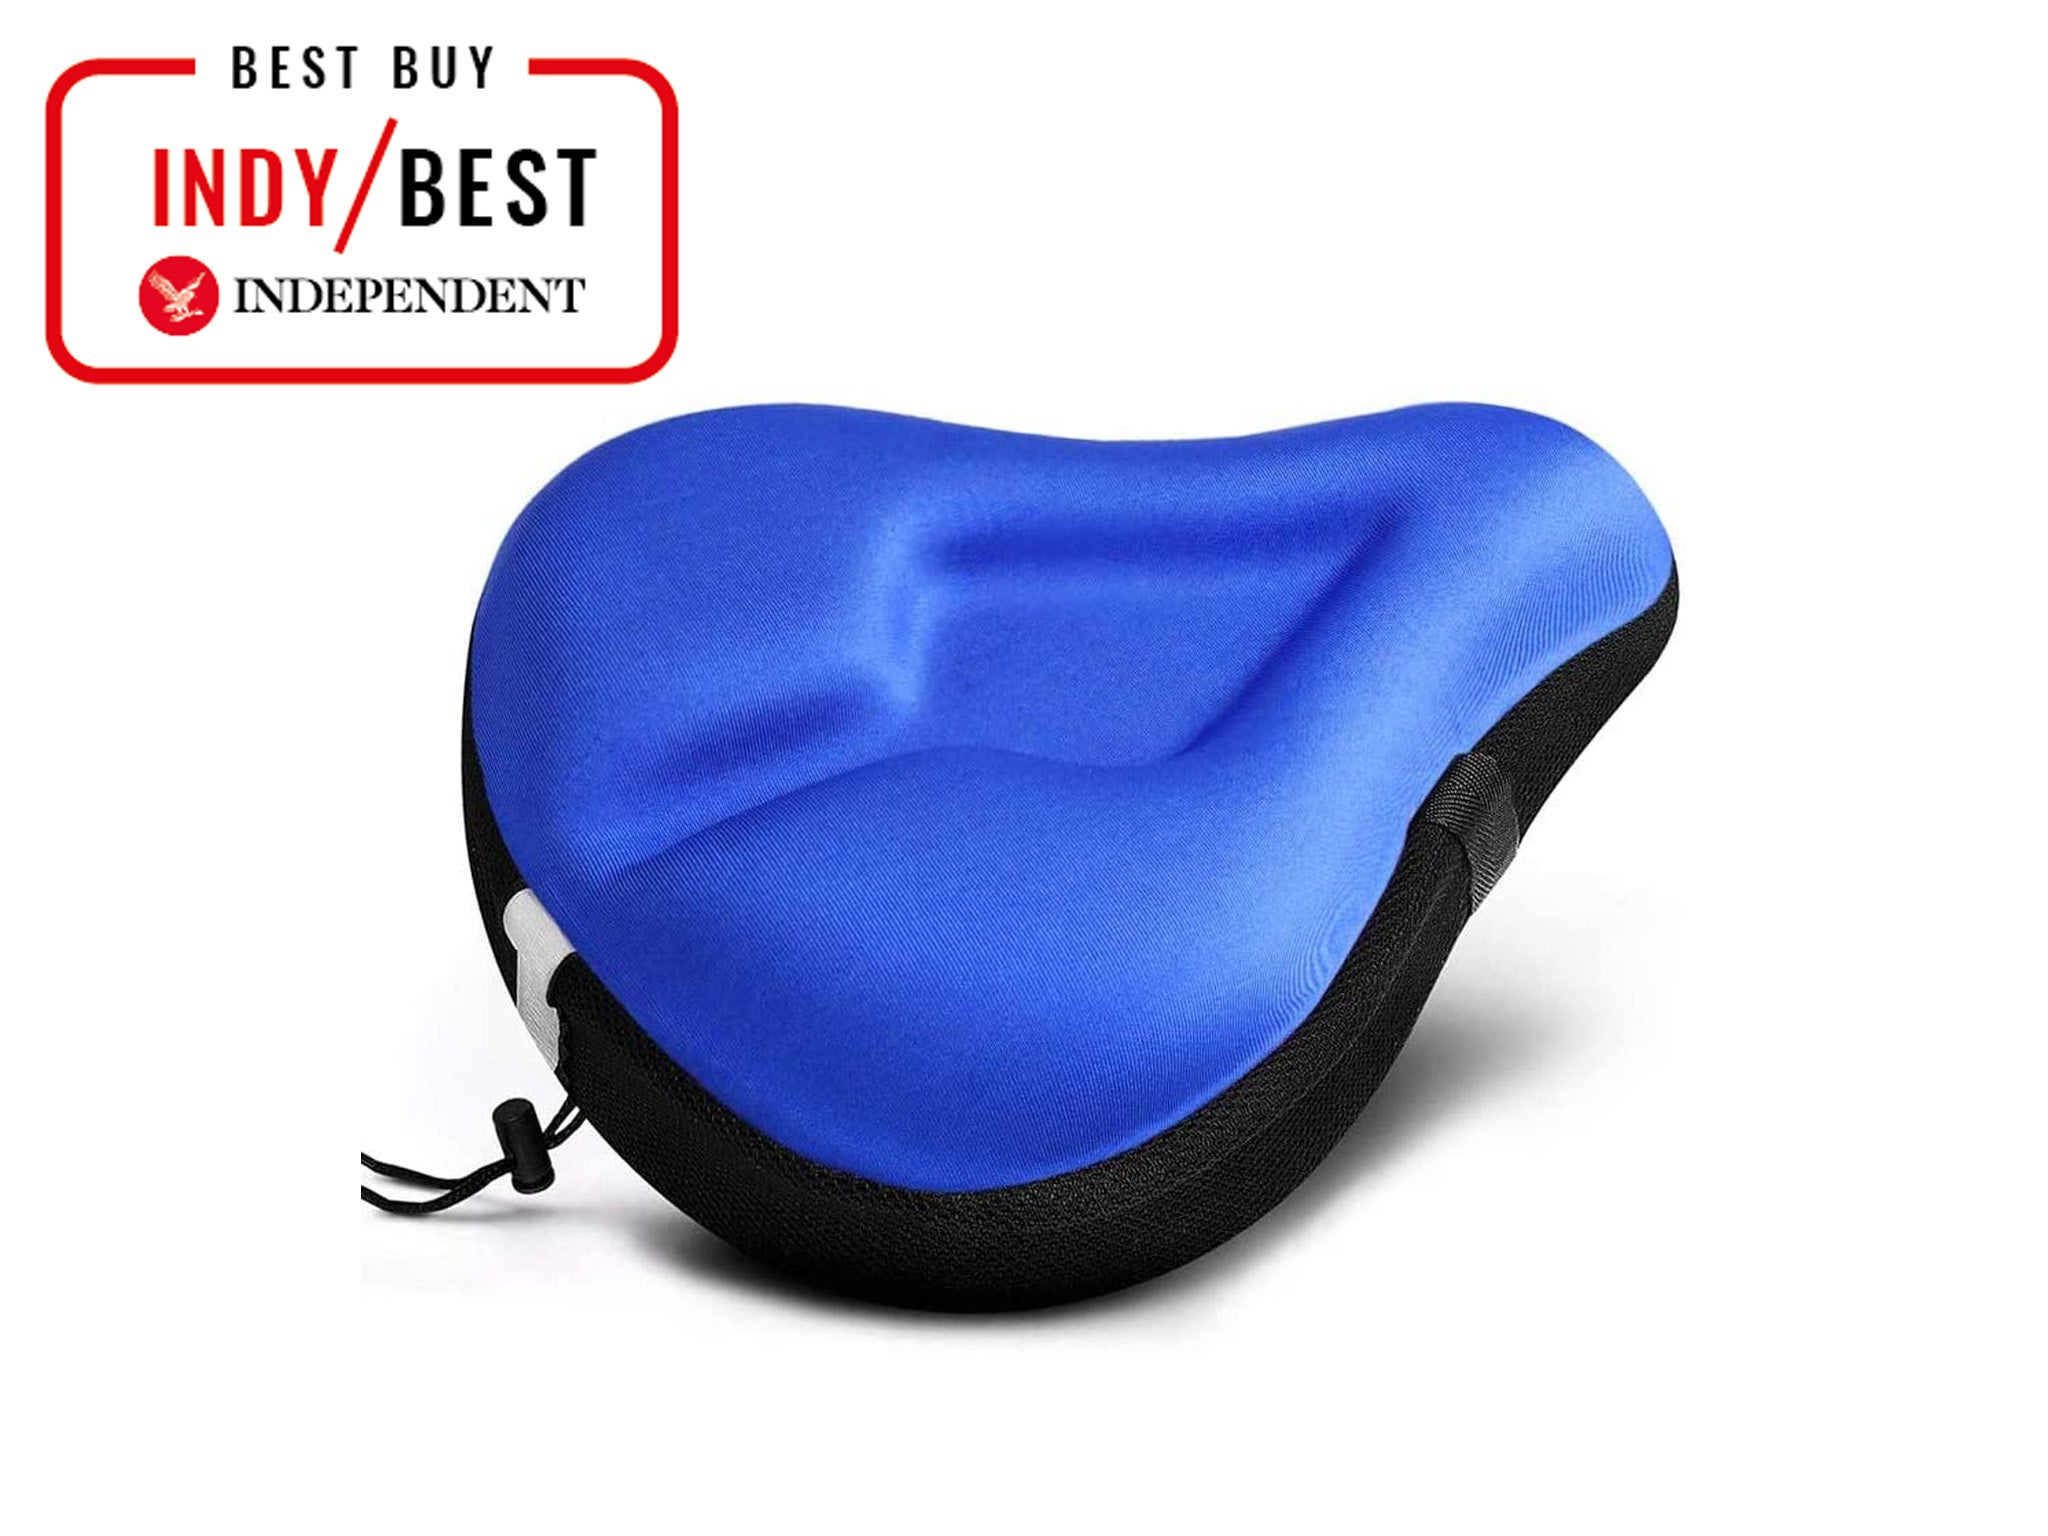 Cycling Seat Saddle Leisun Bike Seat Cover Padded Extra Comfy Soft Non-Slip Seat Cover Cushion with Wide Big Bum for Outdoor MTB Road Bicycle 